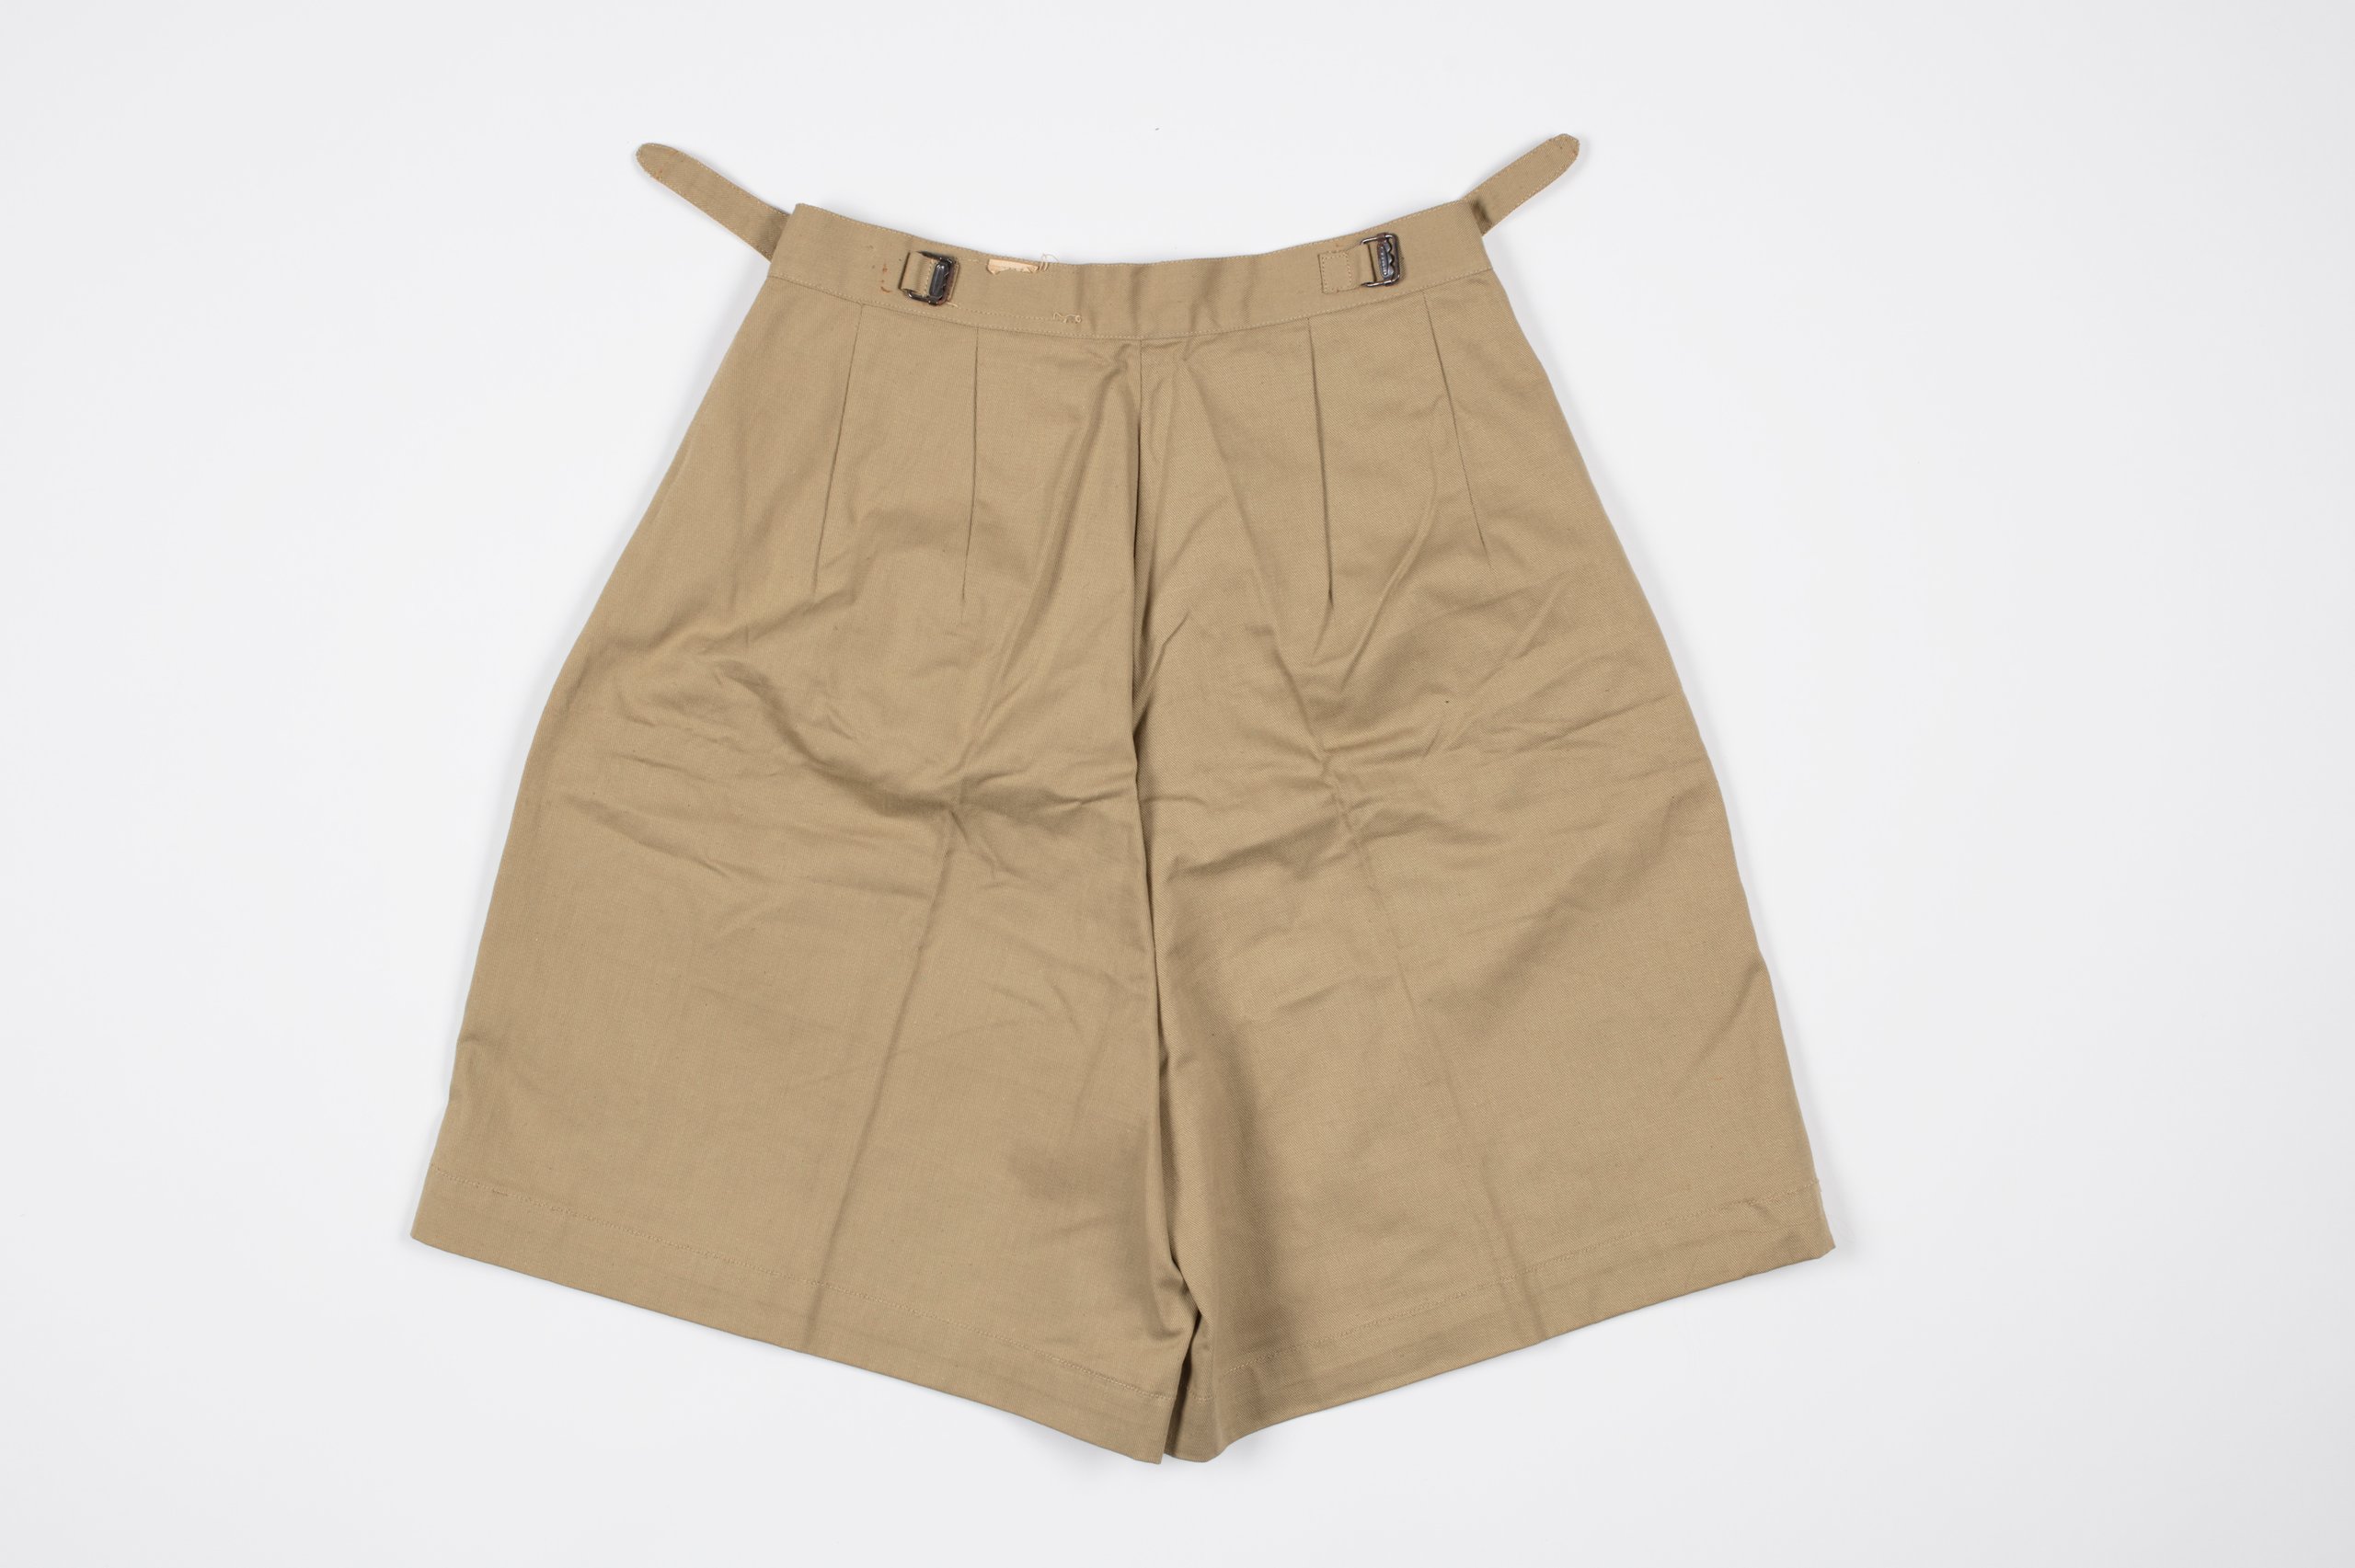 Navy issue shorts by Berlei